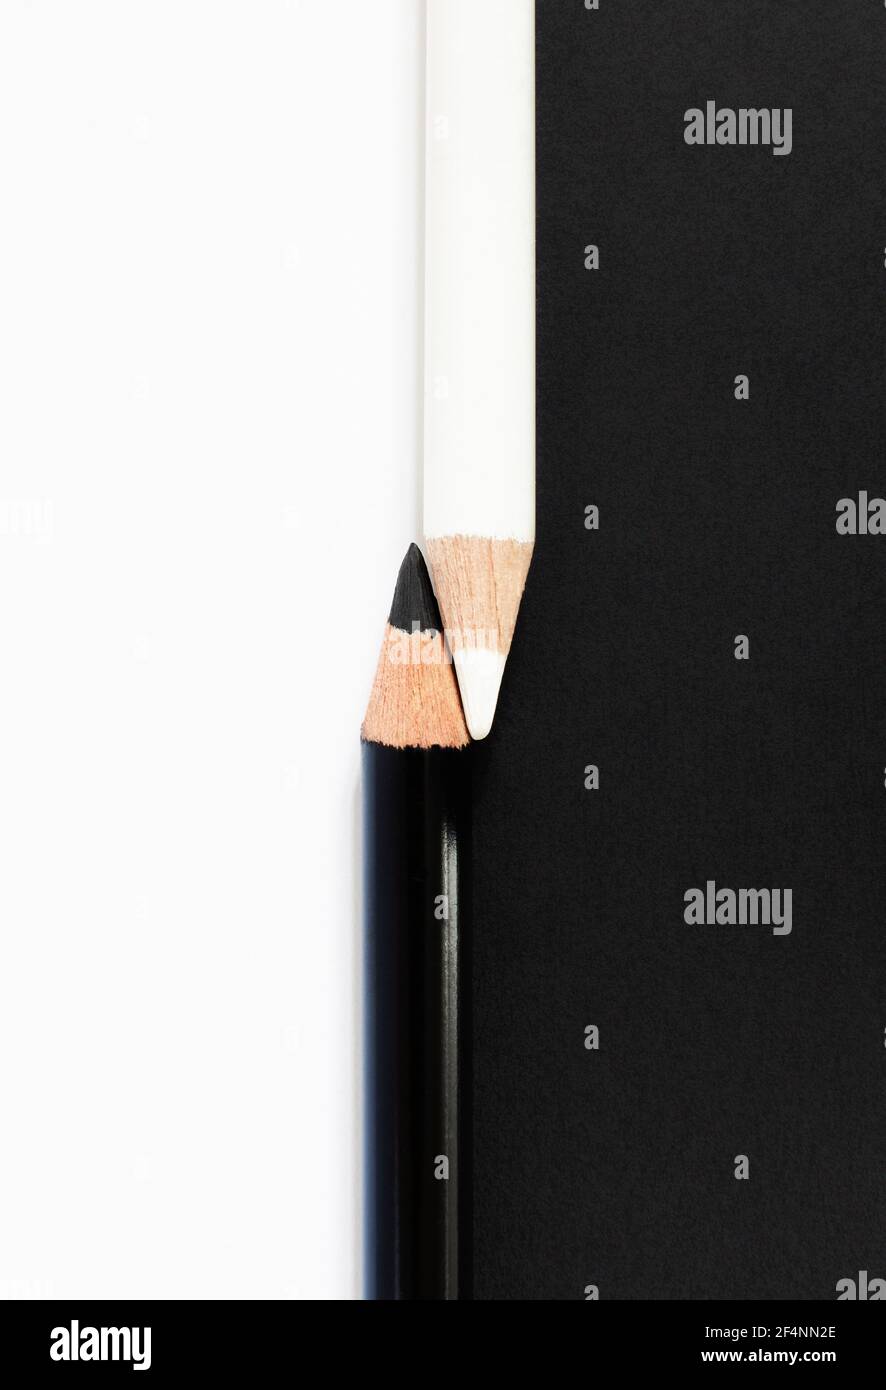 Black And White Pencils Against Contrasting Background To Illustrate Racial Diversity Concept Stock Photo